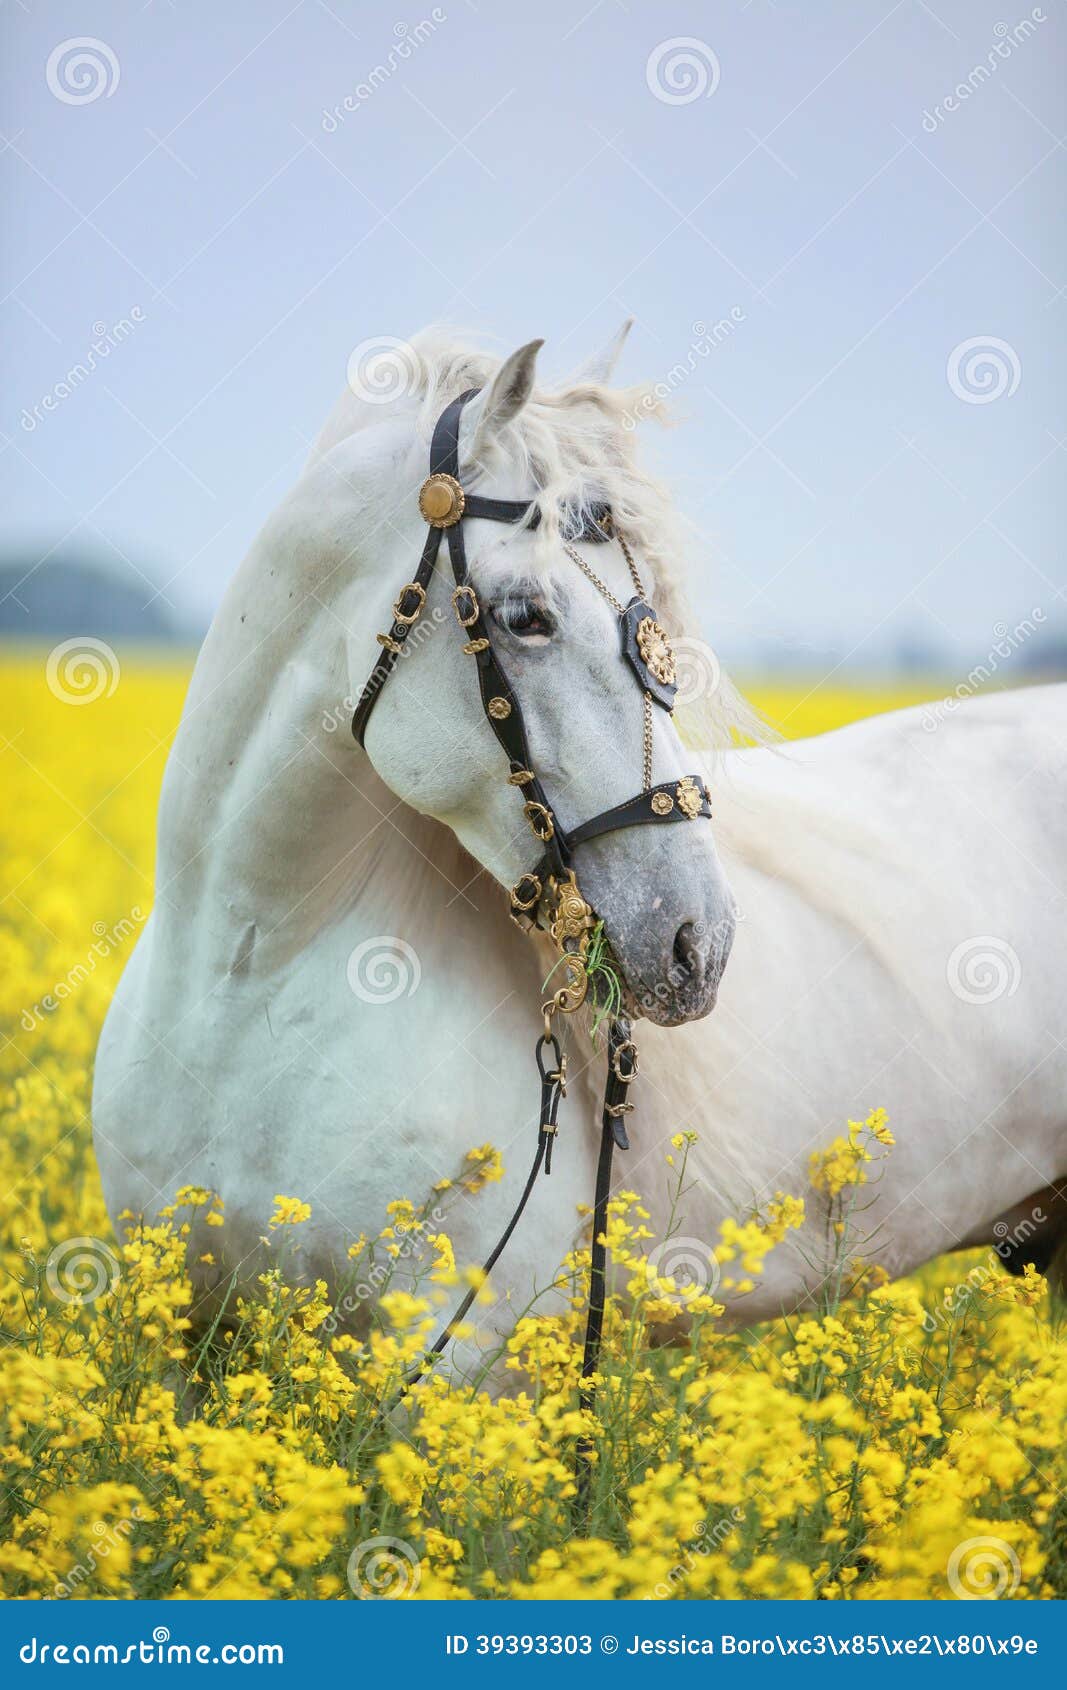 white andalusian horse portrait